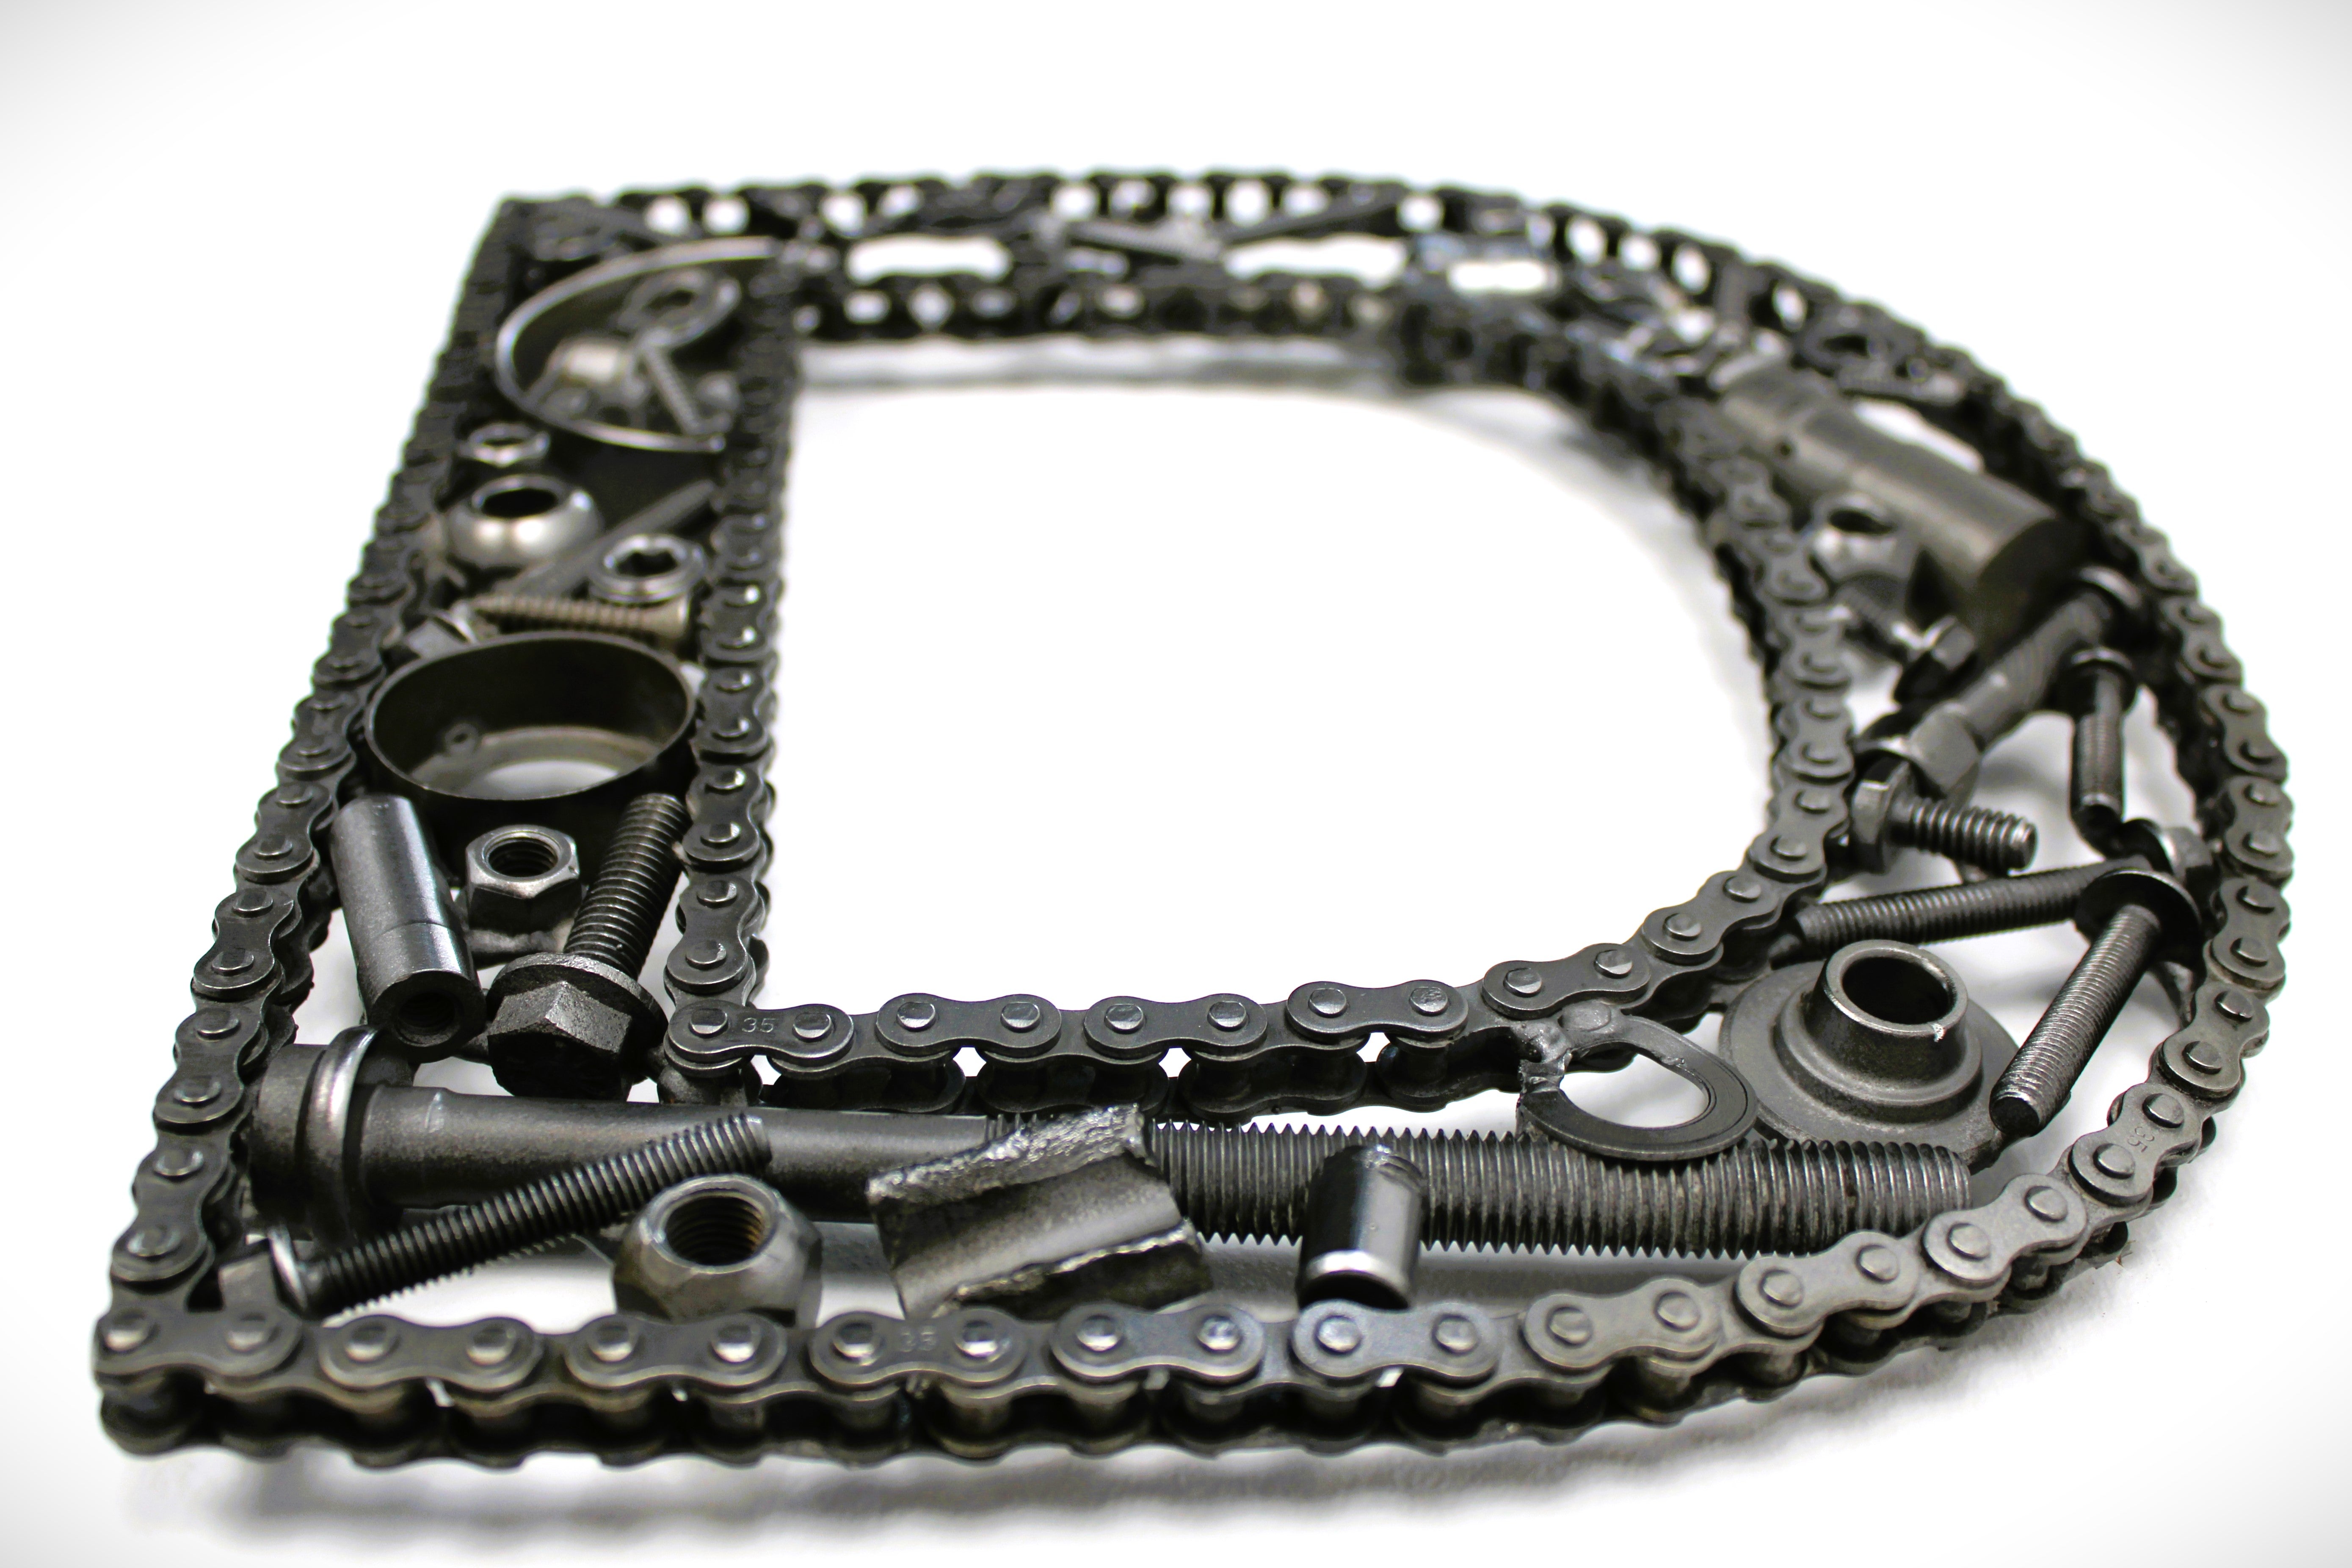 Close-up view of a letter D made out of real car parts, outlined with a timing chain.